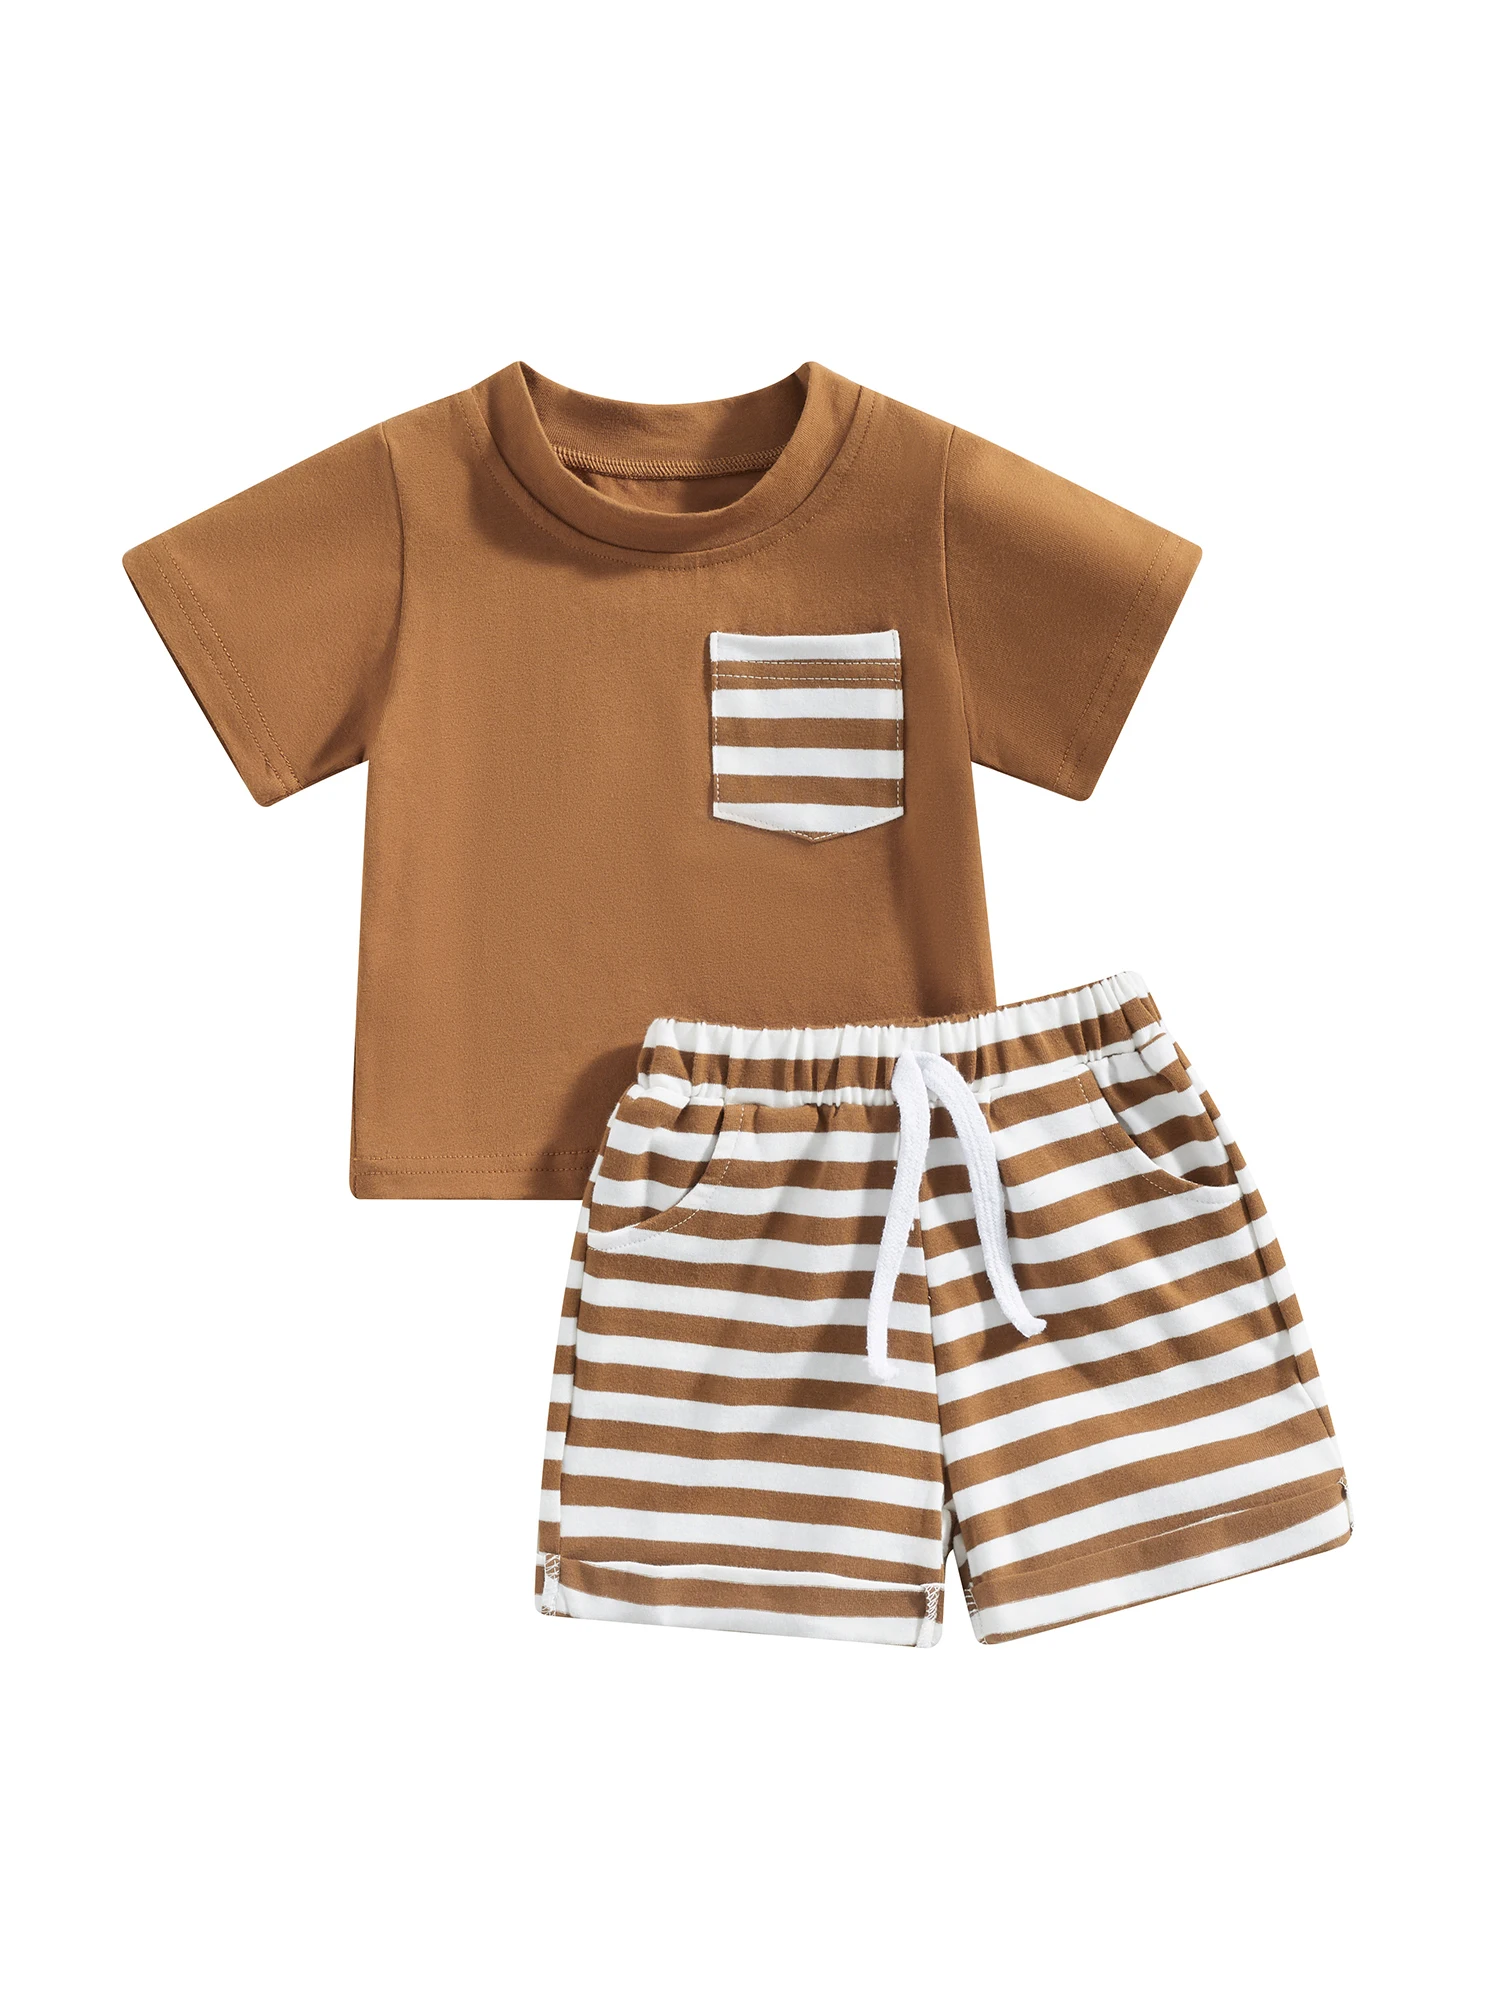 

Emmababy Striped Shorts Set 2Pcs Baby Boy Summer Clothes Patchwork Short Sleeve T-Shirt Toddler Elastic Waist Shorts Outfits